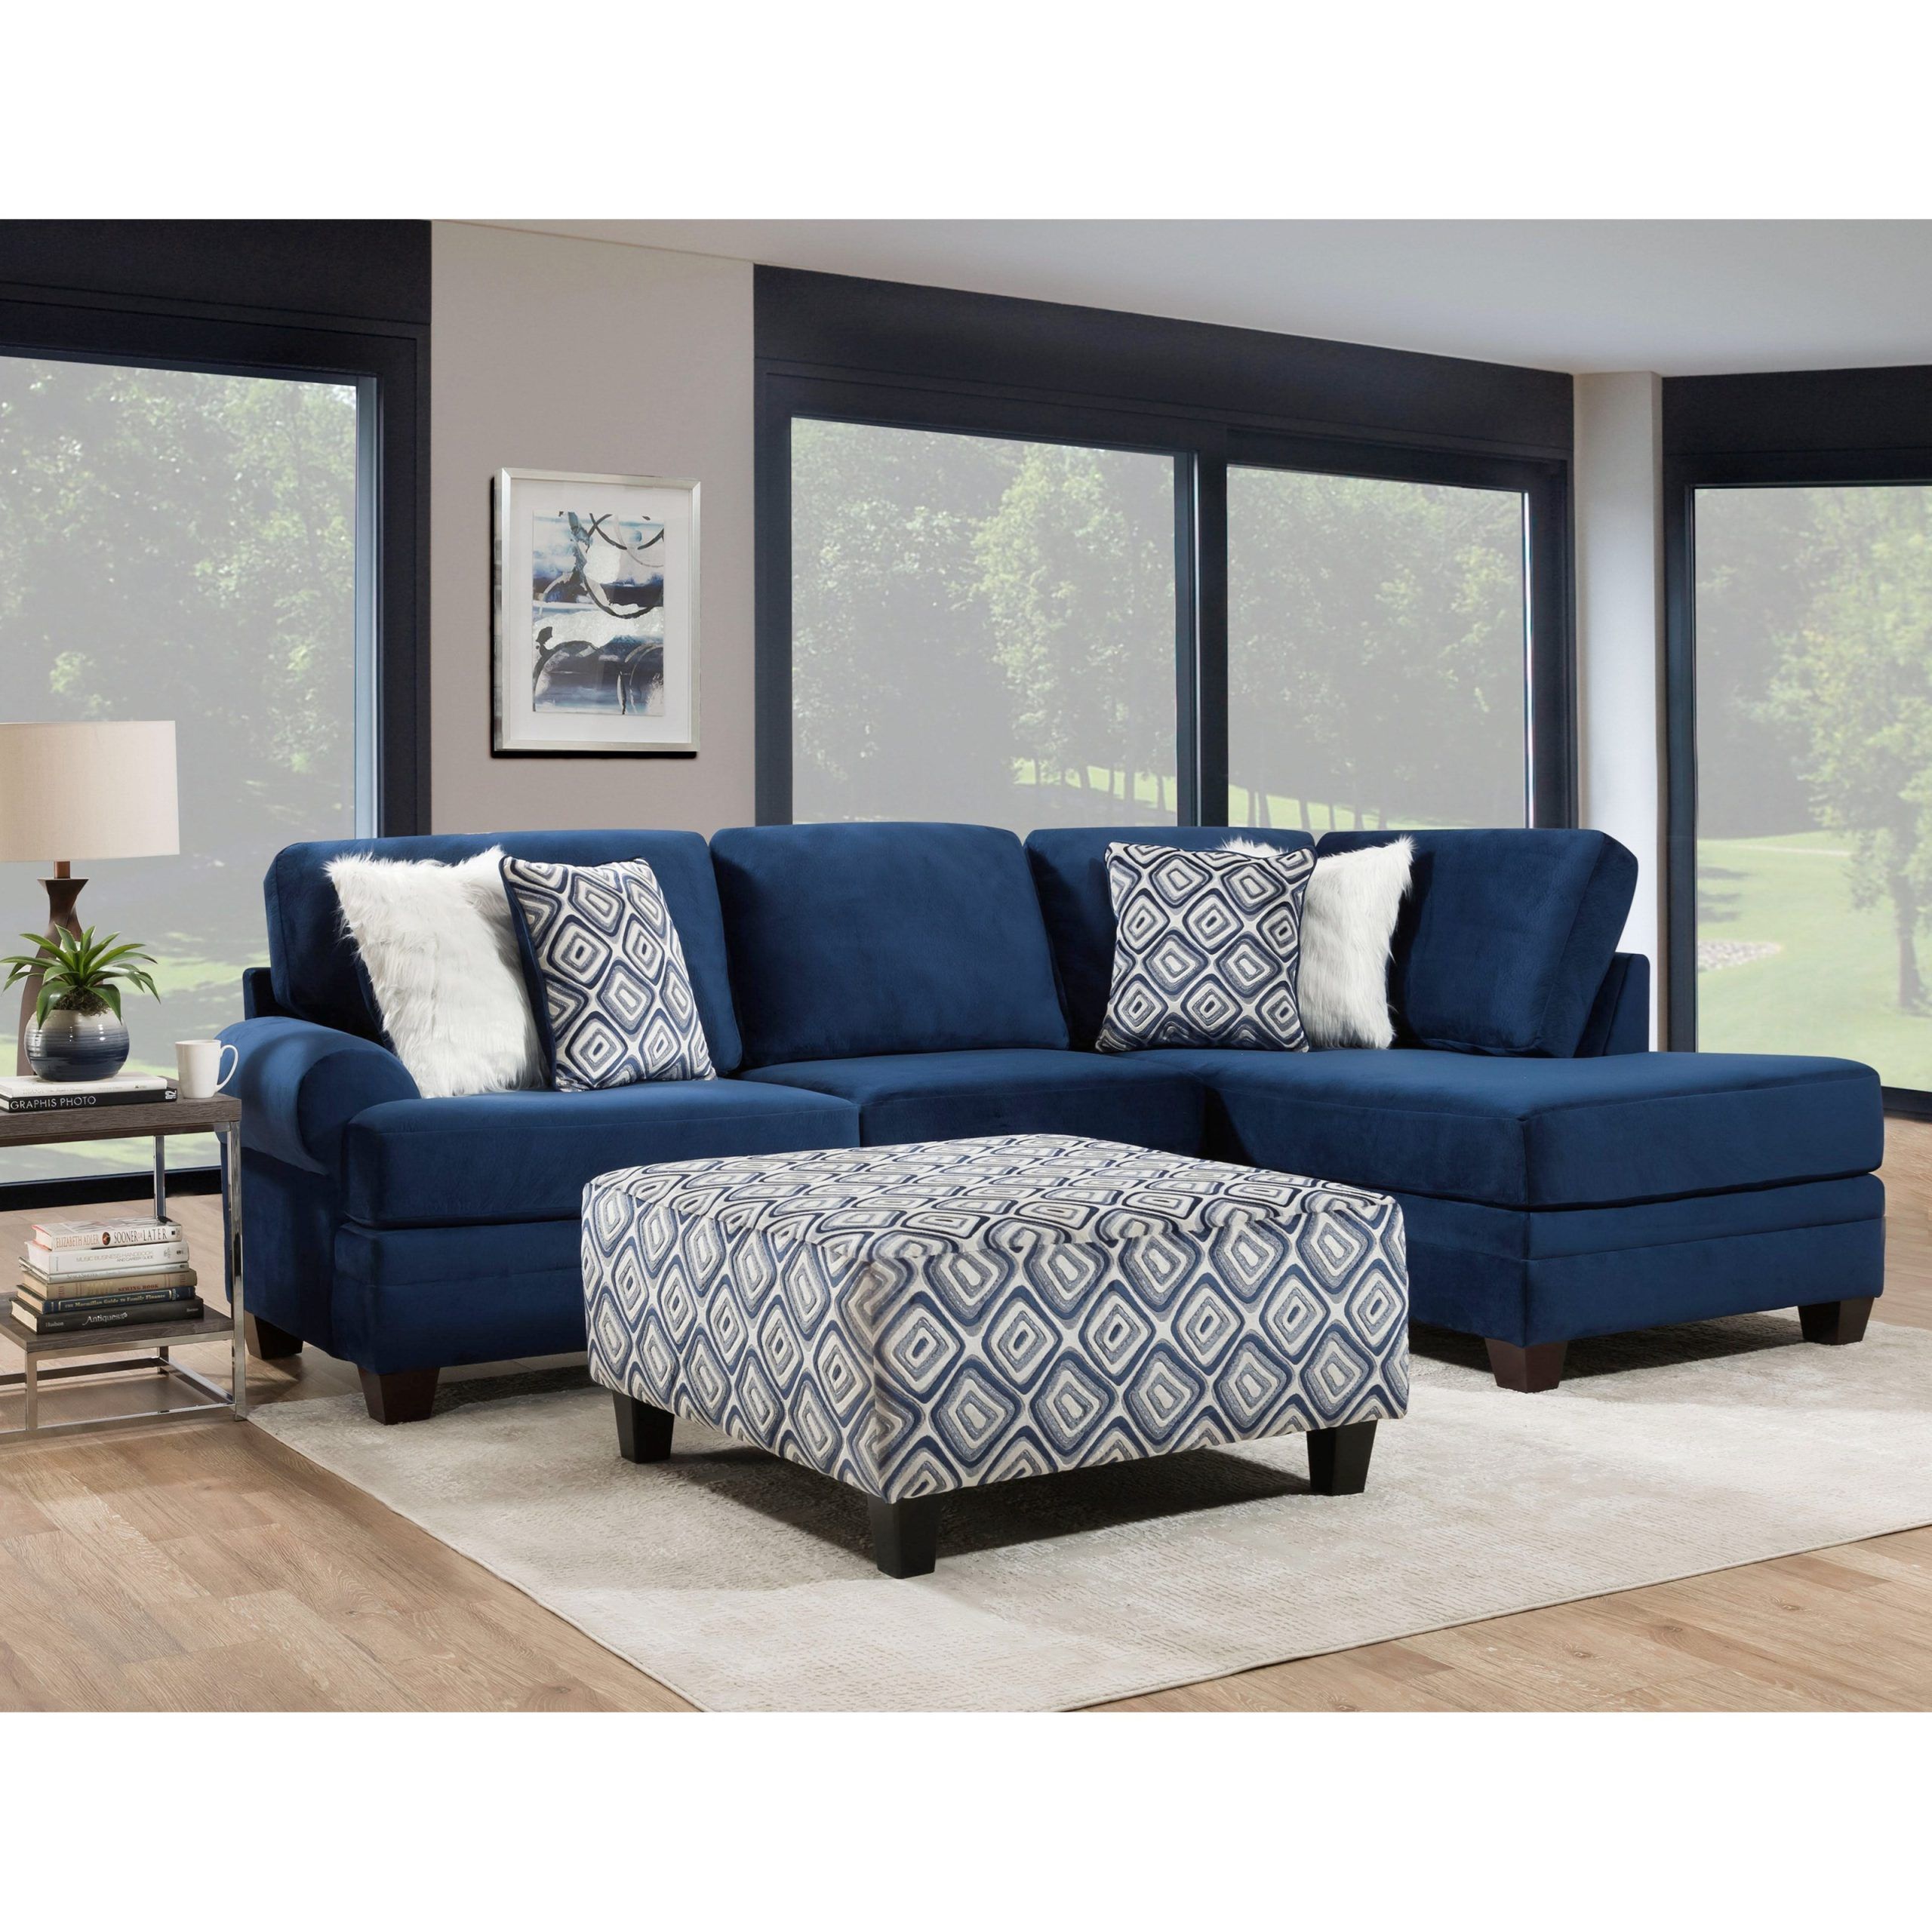 Albany 8642 8642 2pc Gens 35249 Groovy Navy Transitional Sectional Sofa With Regard To Navy Linen Coil Sofas (View 8 of 20)